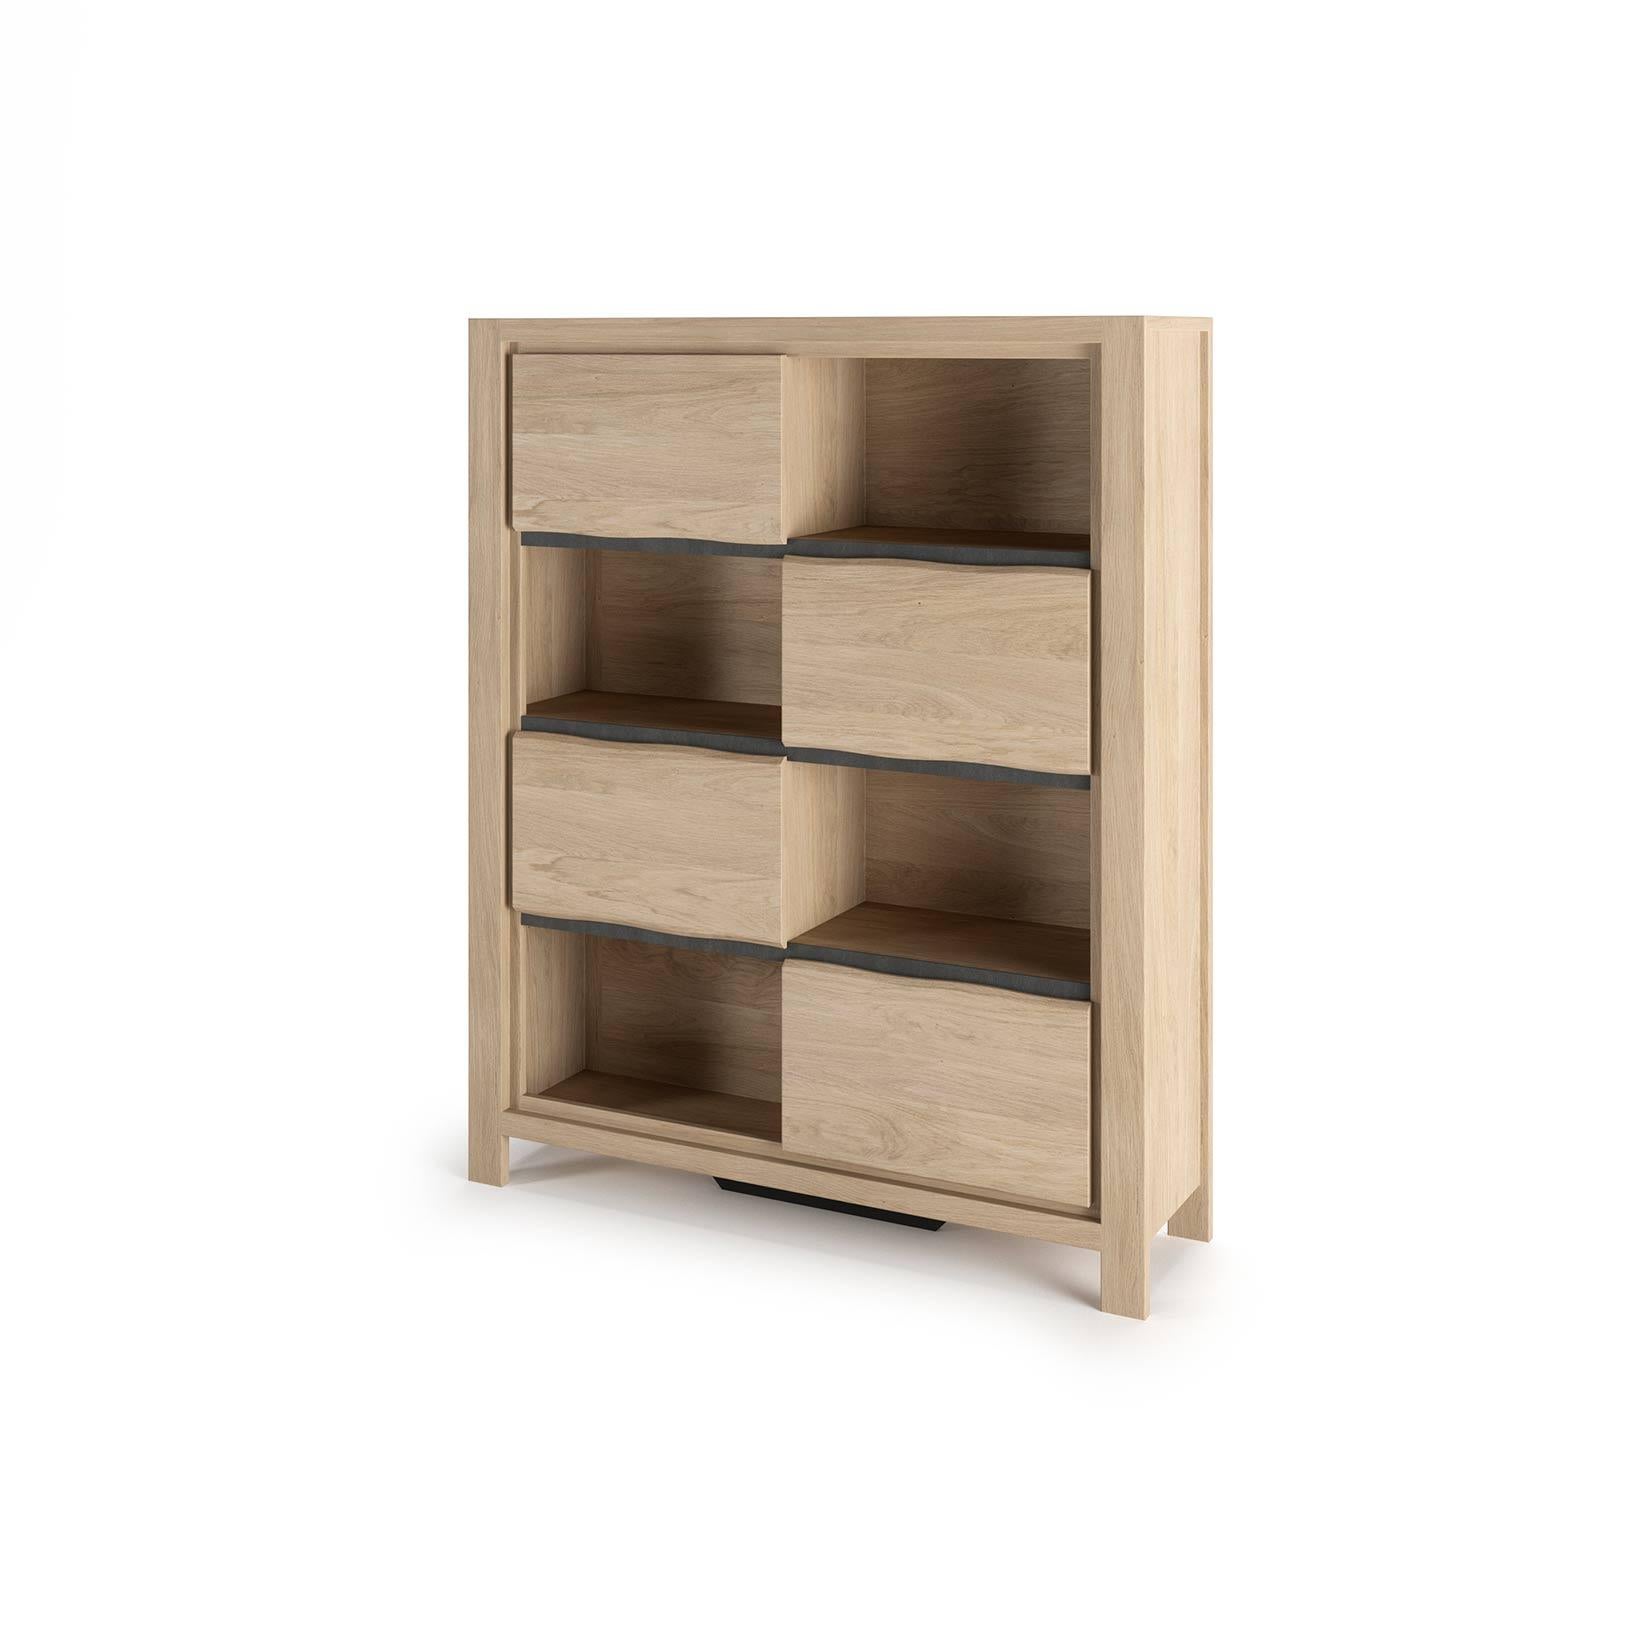 Library w/ 4 Doors and 4 Niches.

- Frame: 
19mm Solid oak wood: Plumbs and Tray Gridles 
Particleboard with 0.9mm oak veneer: Top, Bottom and Girdles
MDF 6mm with 0.9mm oak veneer: Back

- Fronts: 
19mm chipboard with 0.9mm oak veneer: Doors and